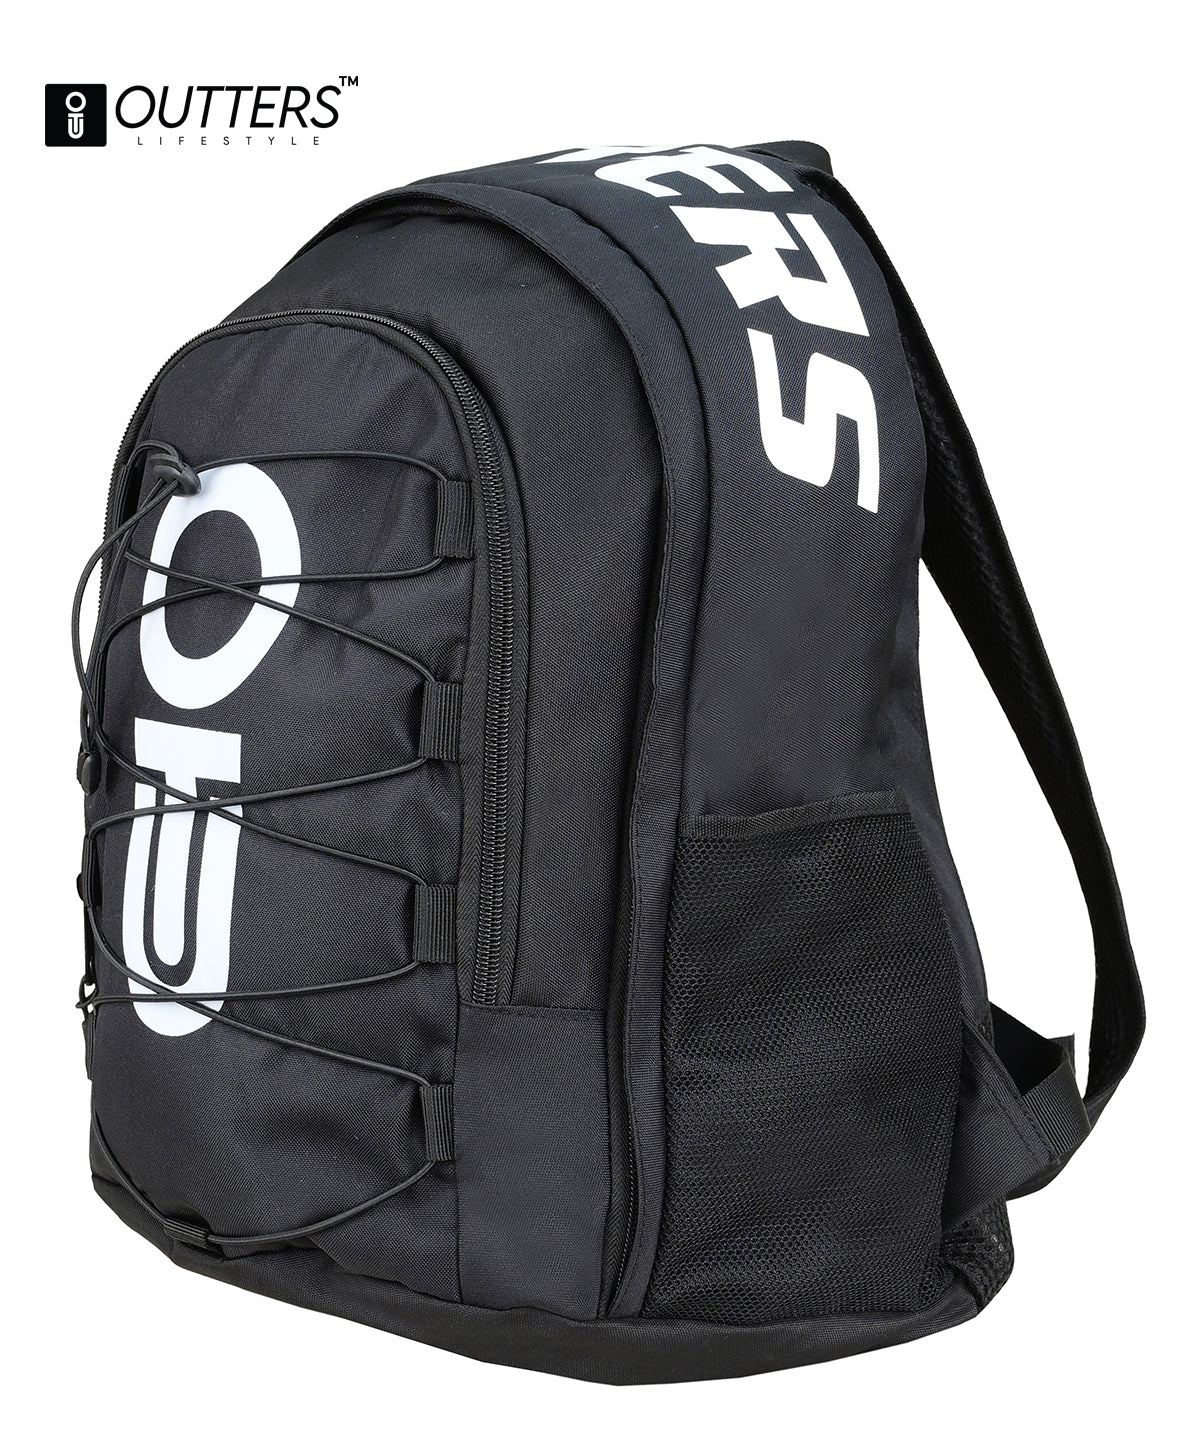 Outters  Unisex Prime Backpack, Black, One Size